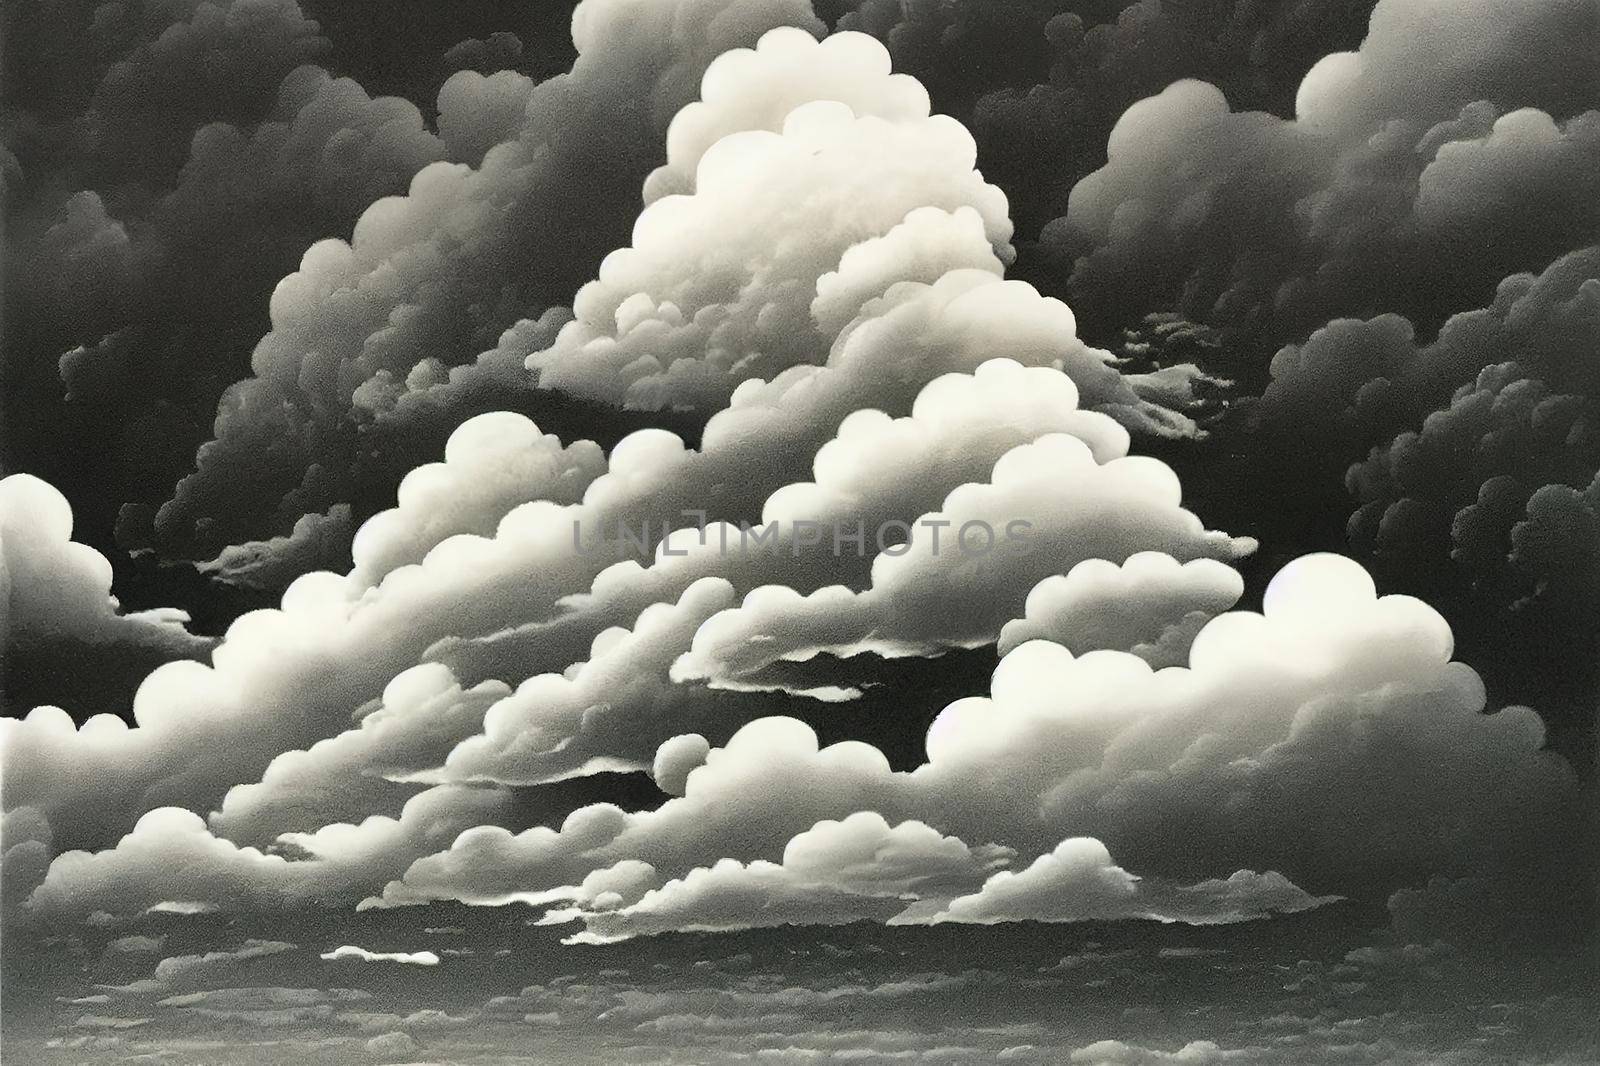 White Sky and Puffy Clouds. High quality illustration